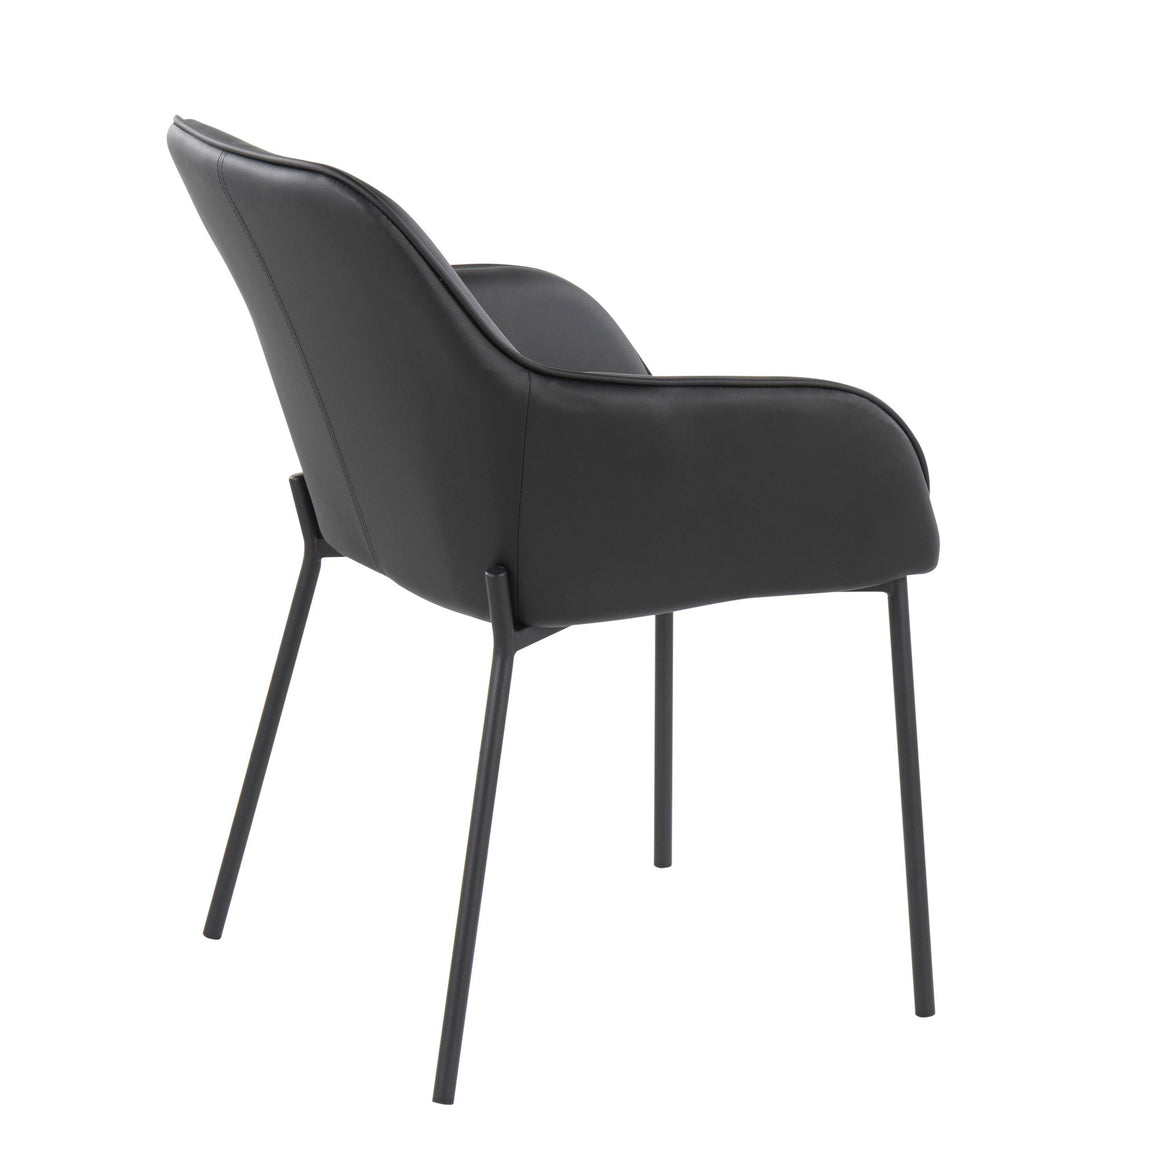 Daniella Contemporary Dining Chair in Black Steel and Black Faux Leather by LumiSource - Set of 2